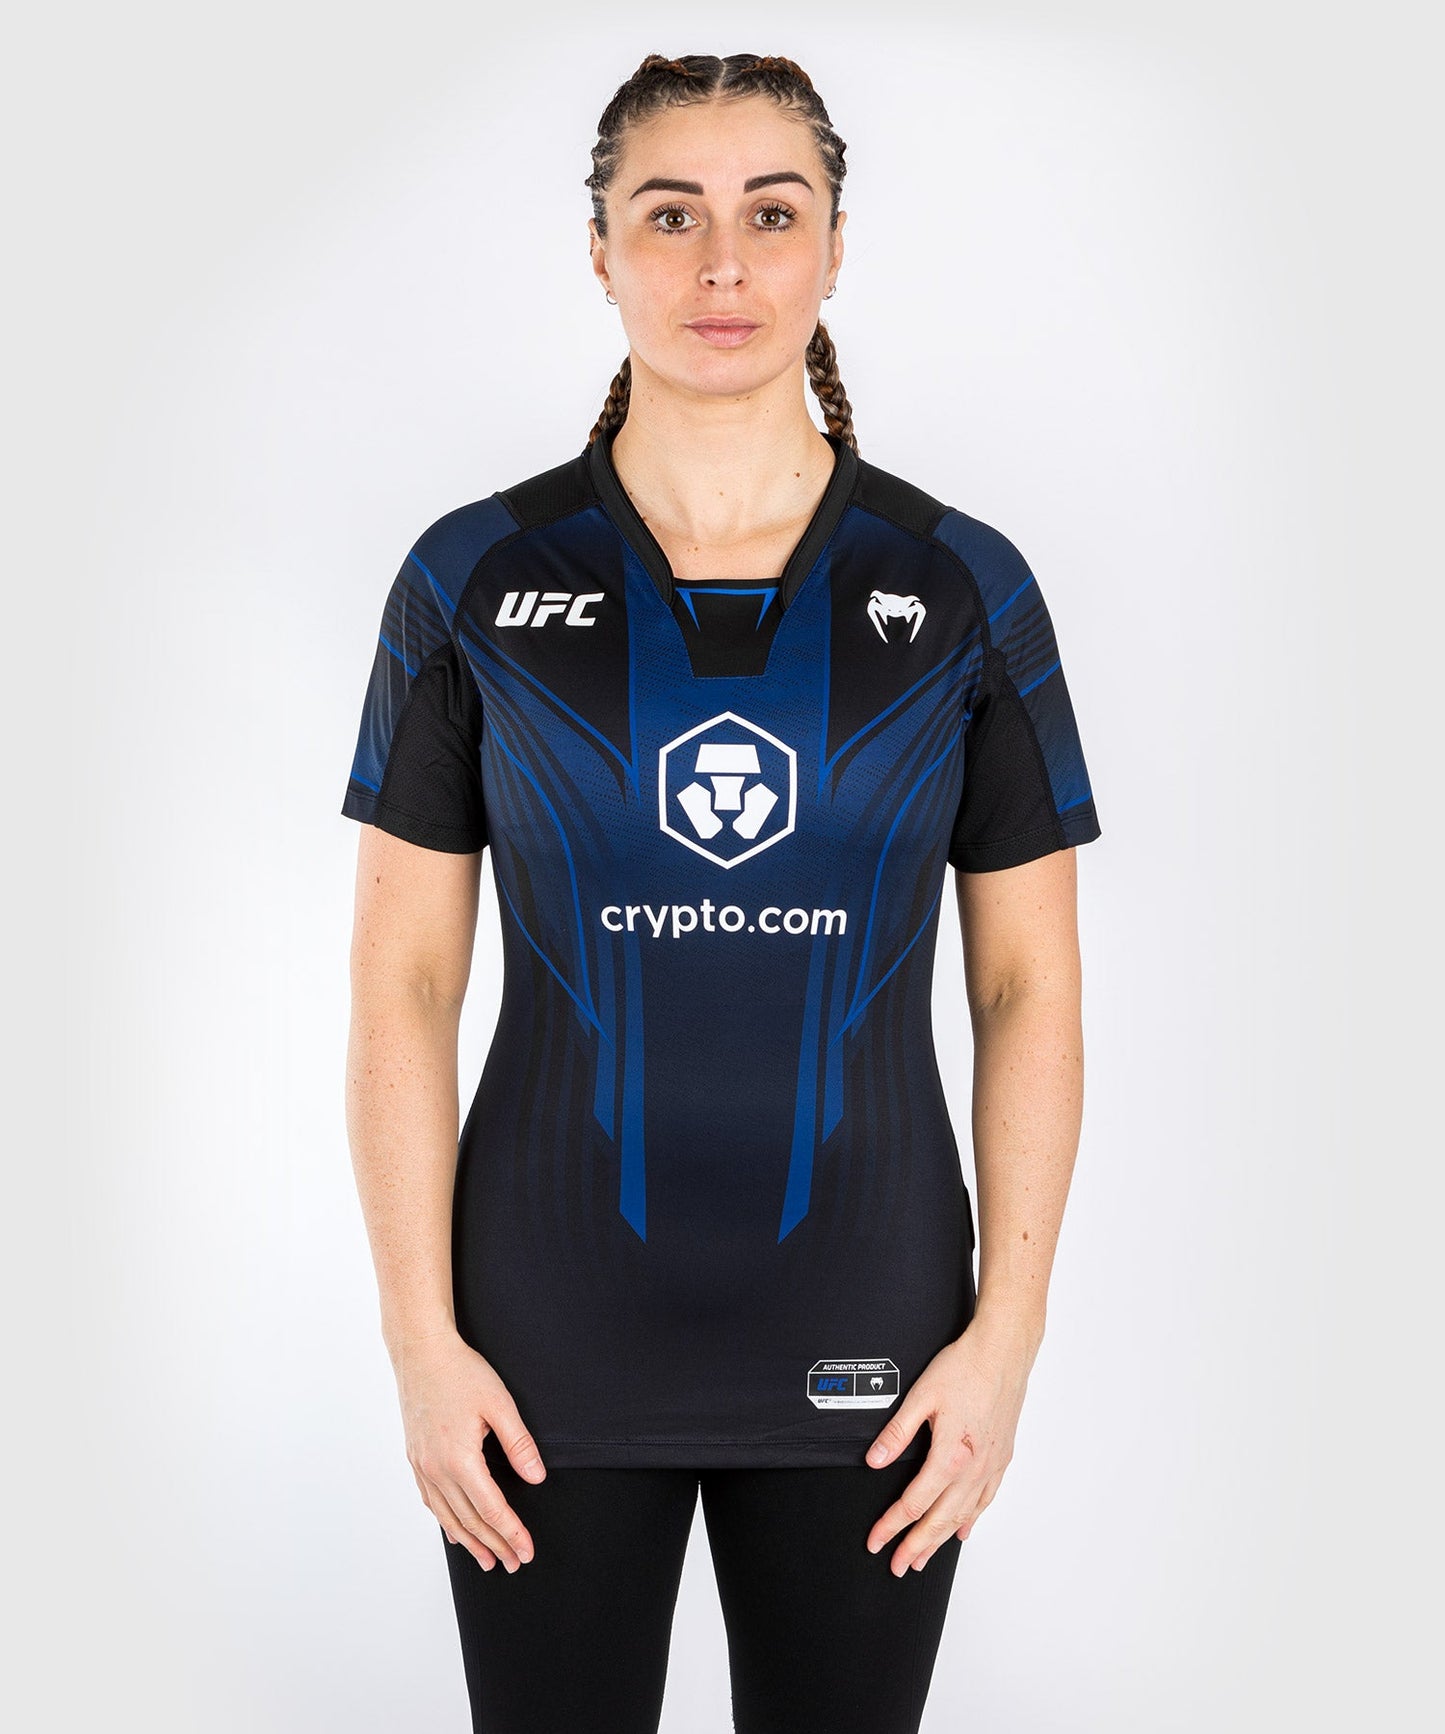 UFC Venum Personalized Authentic Fight Night 2.0 kit by Venum Women's Walkout Jersey - Midnight Edition